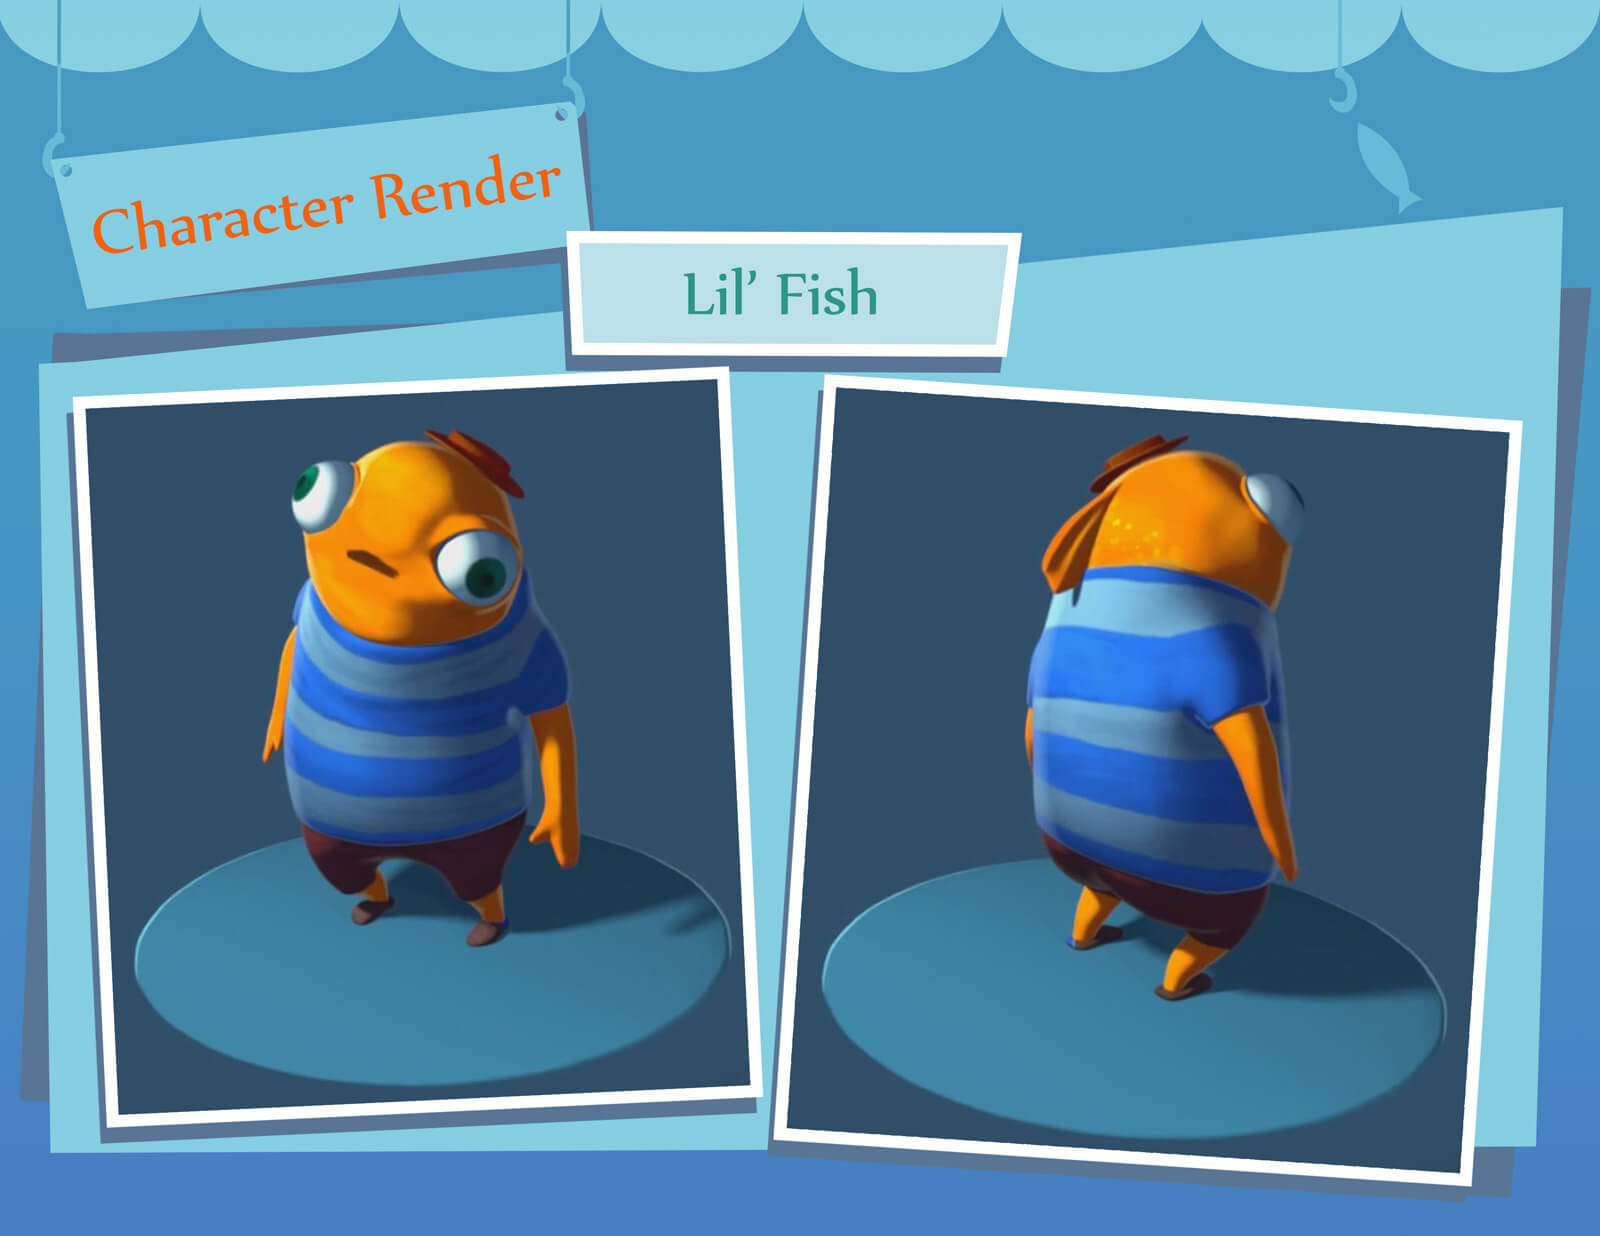 A fully rendered 3D model of an orange fish in a blue-striped shirt and red hat labeled "Lil' Fish"